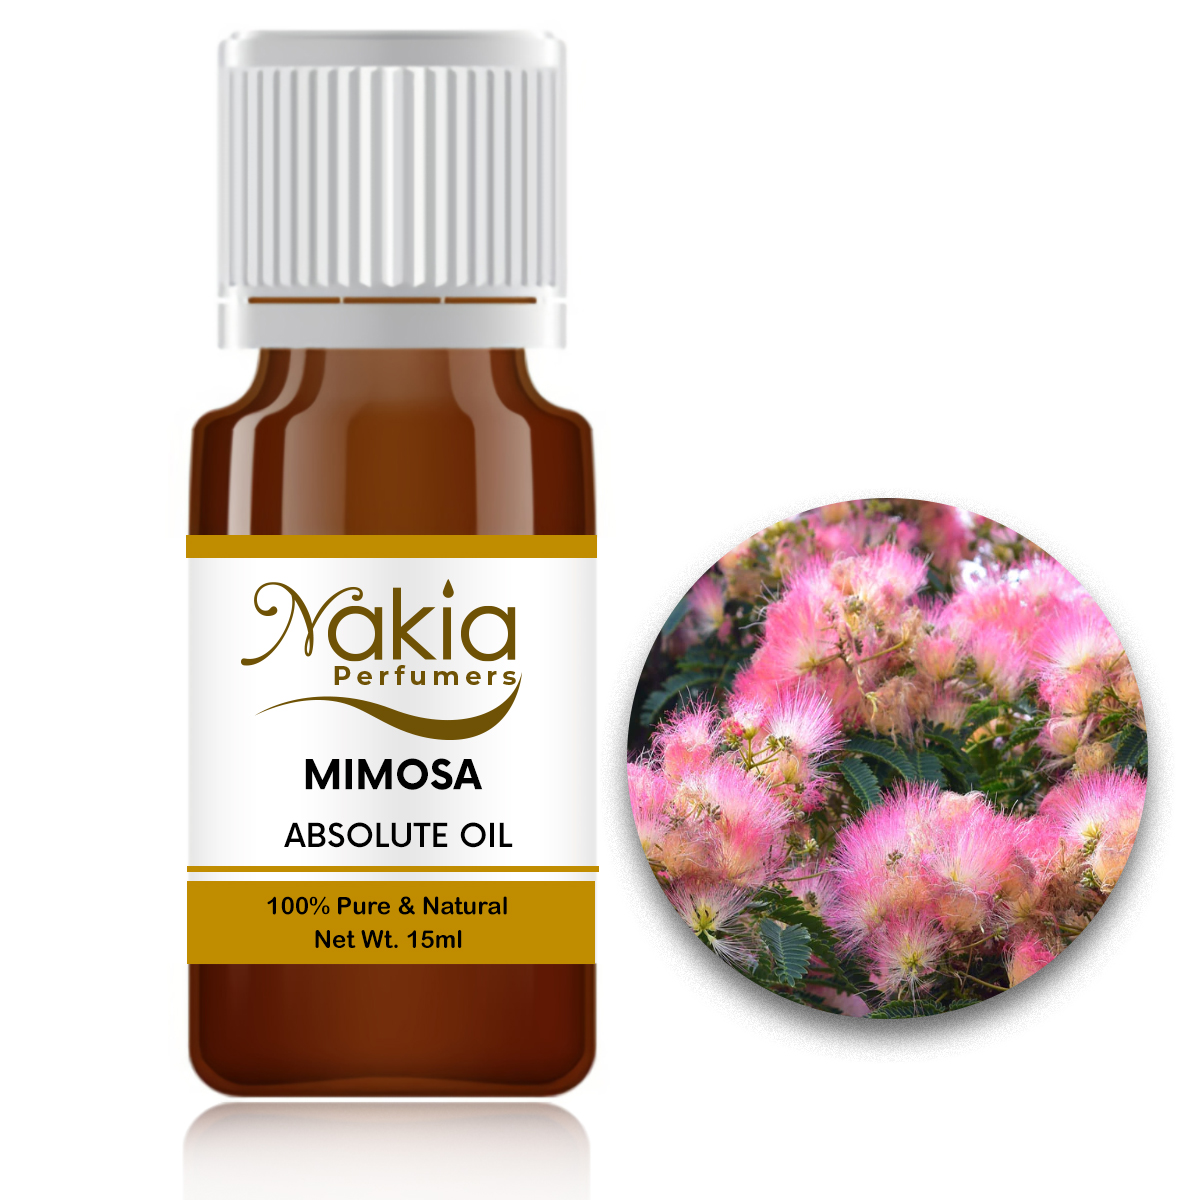 MIMOSA ABSOLUTE OIL